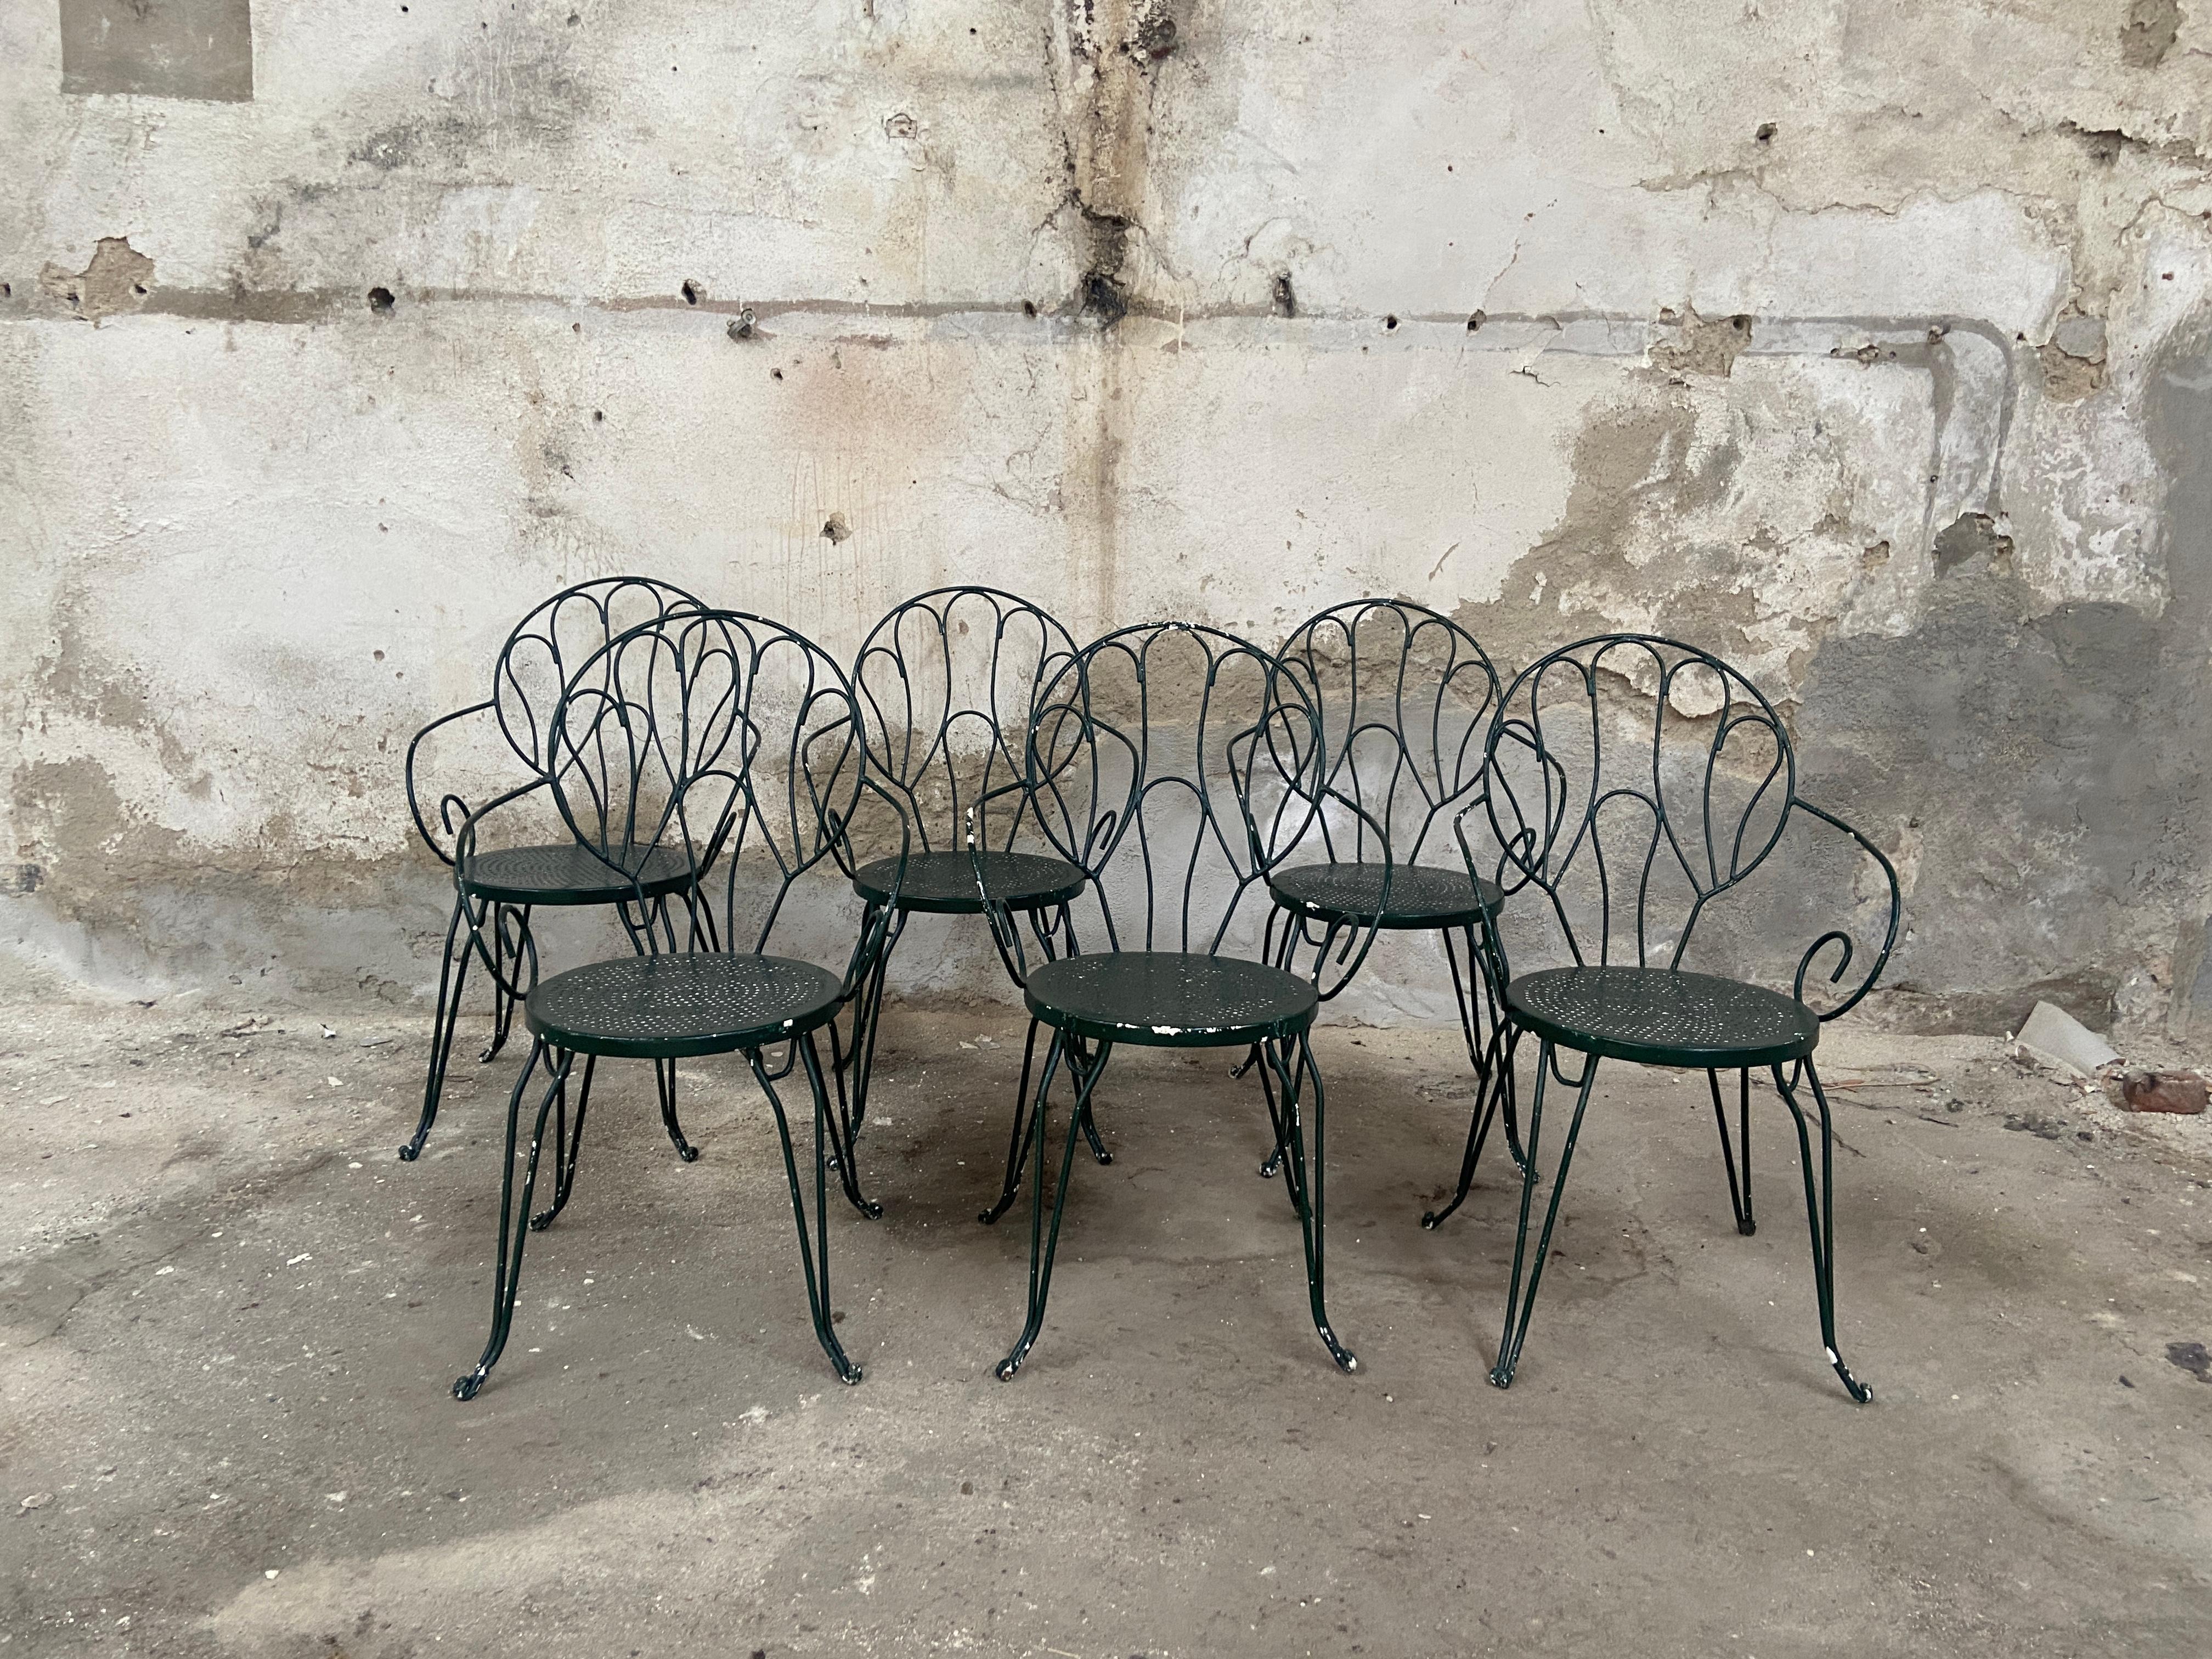 Mid-20th Century Mid-Century Modern Italian Set of Green Painted Iron Garden Chairs from 1960s For Sale